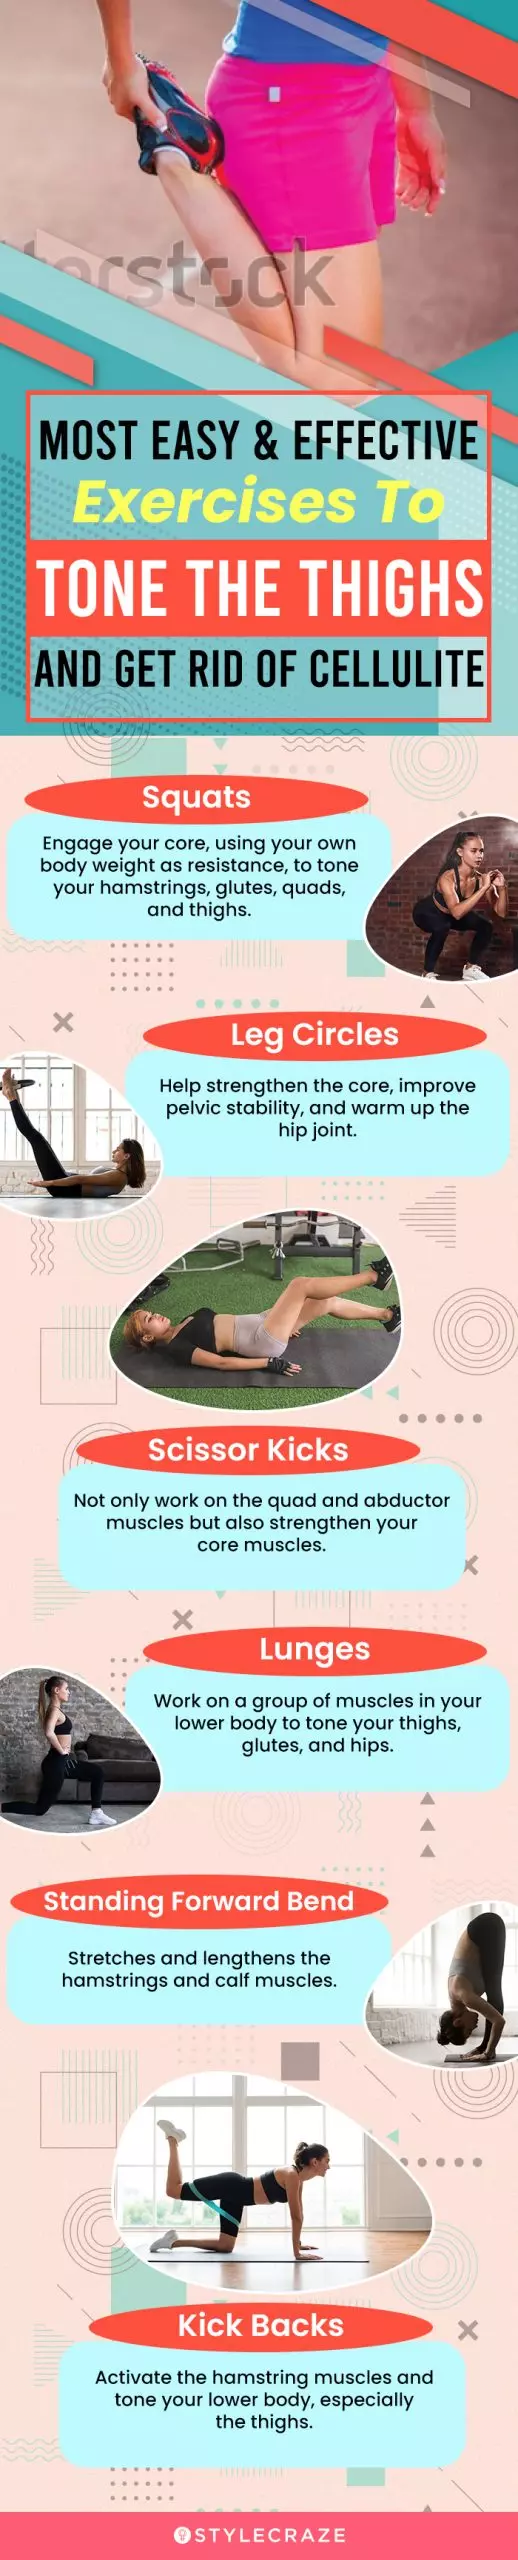 most easy & effective excercises to tone the things and get rid of cellulite (infographic)